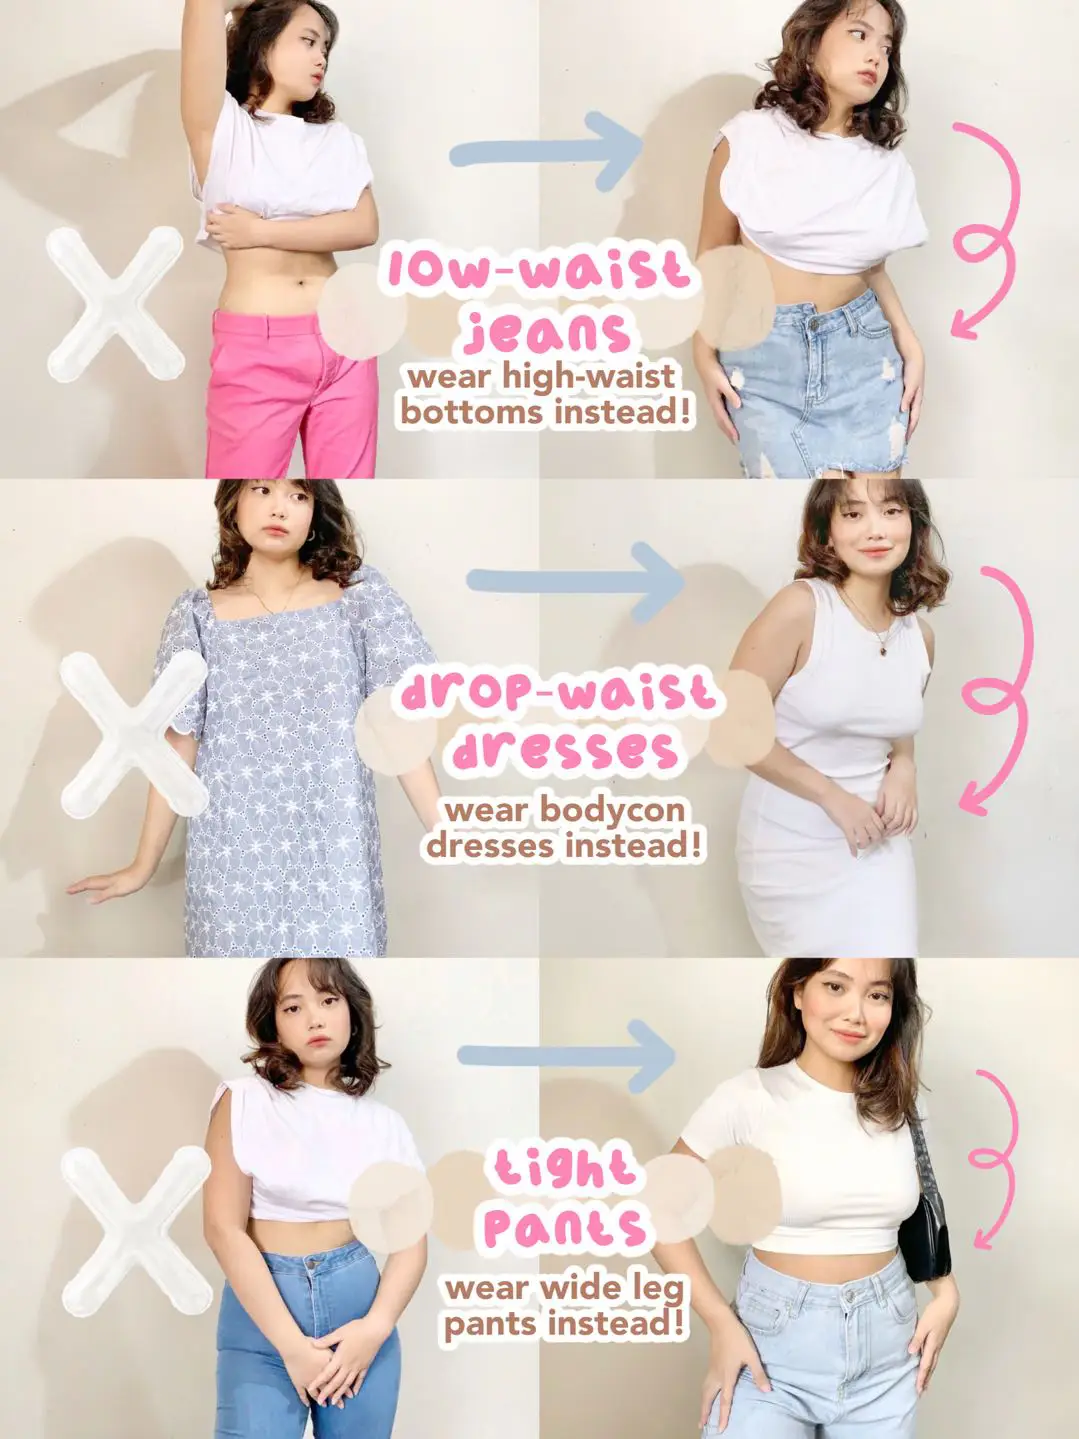 How To Wear High Waist Pants If You Have a Short Waist